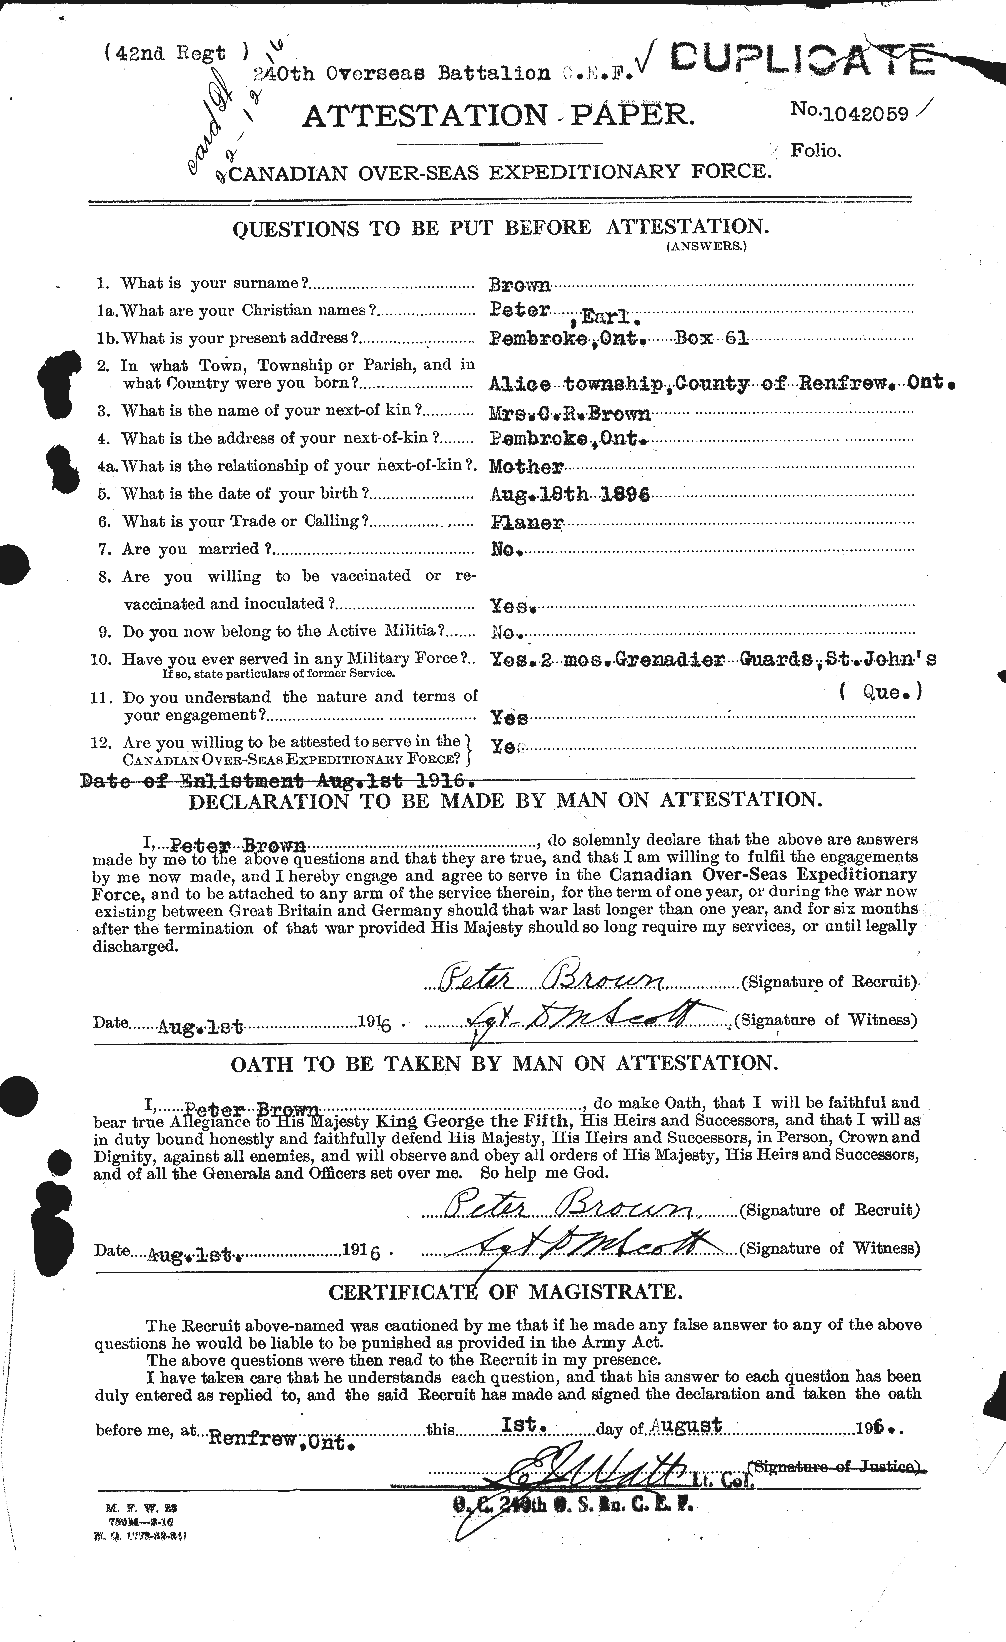 Personnel Records of the First World War - CEF 267204a